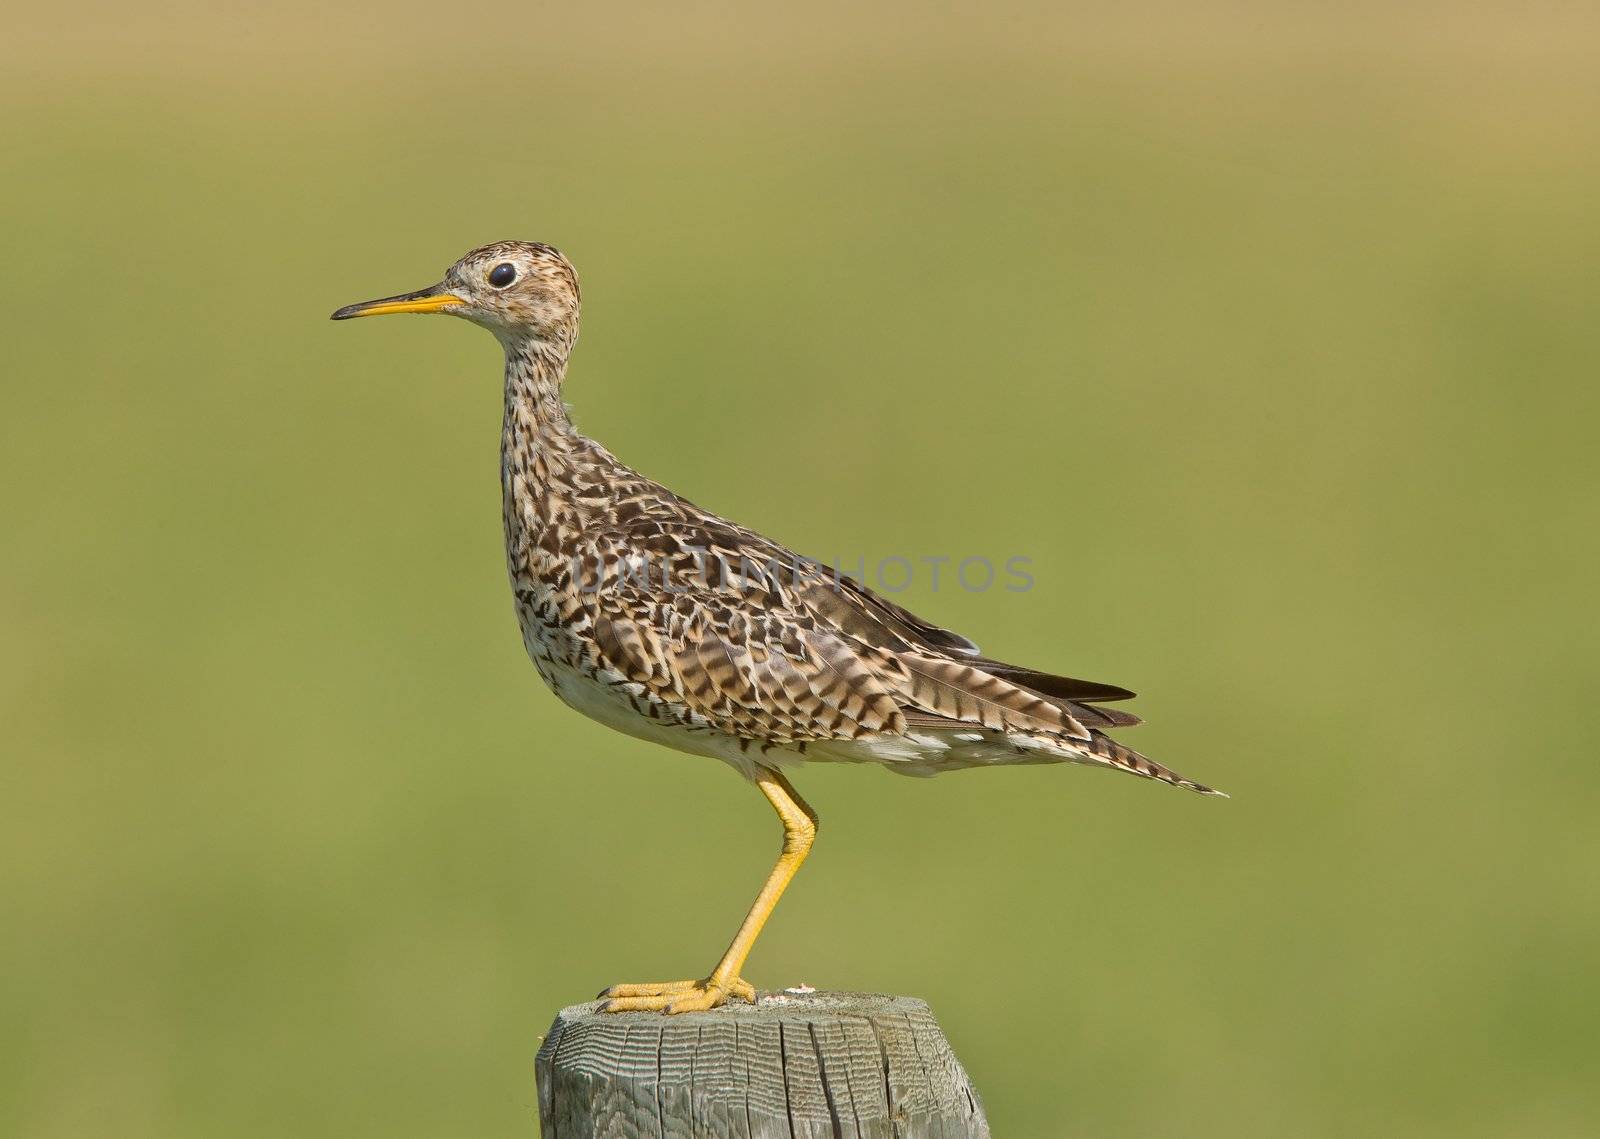 Upland Sandpiper on post by pictureguy